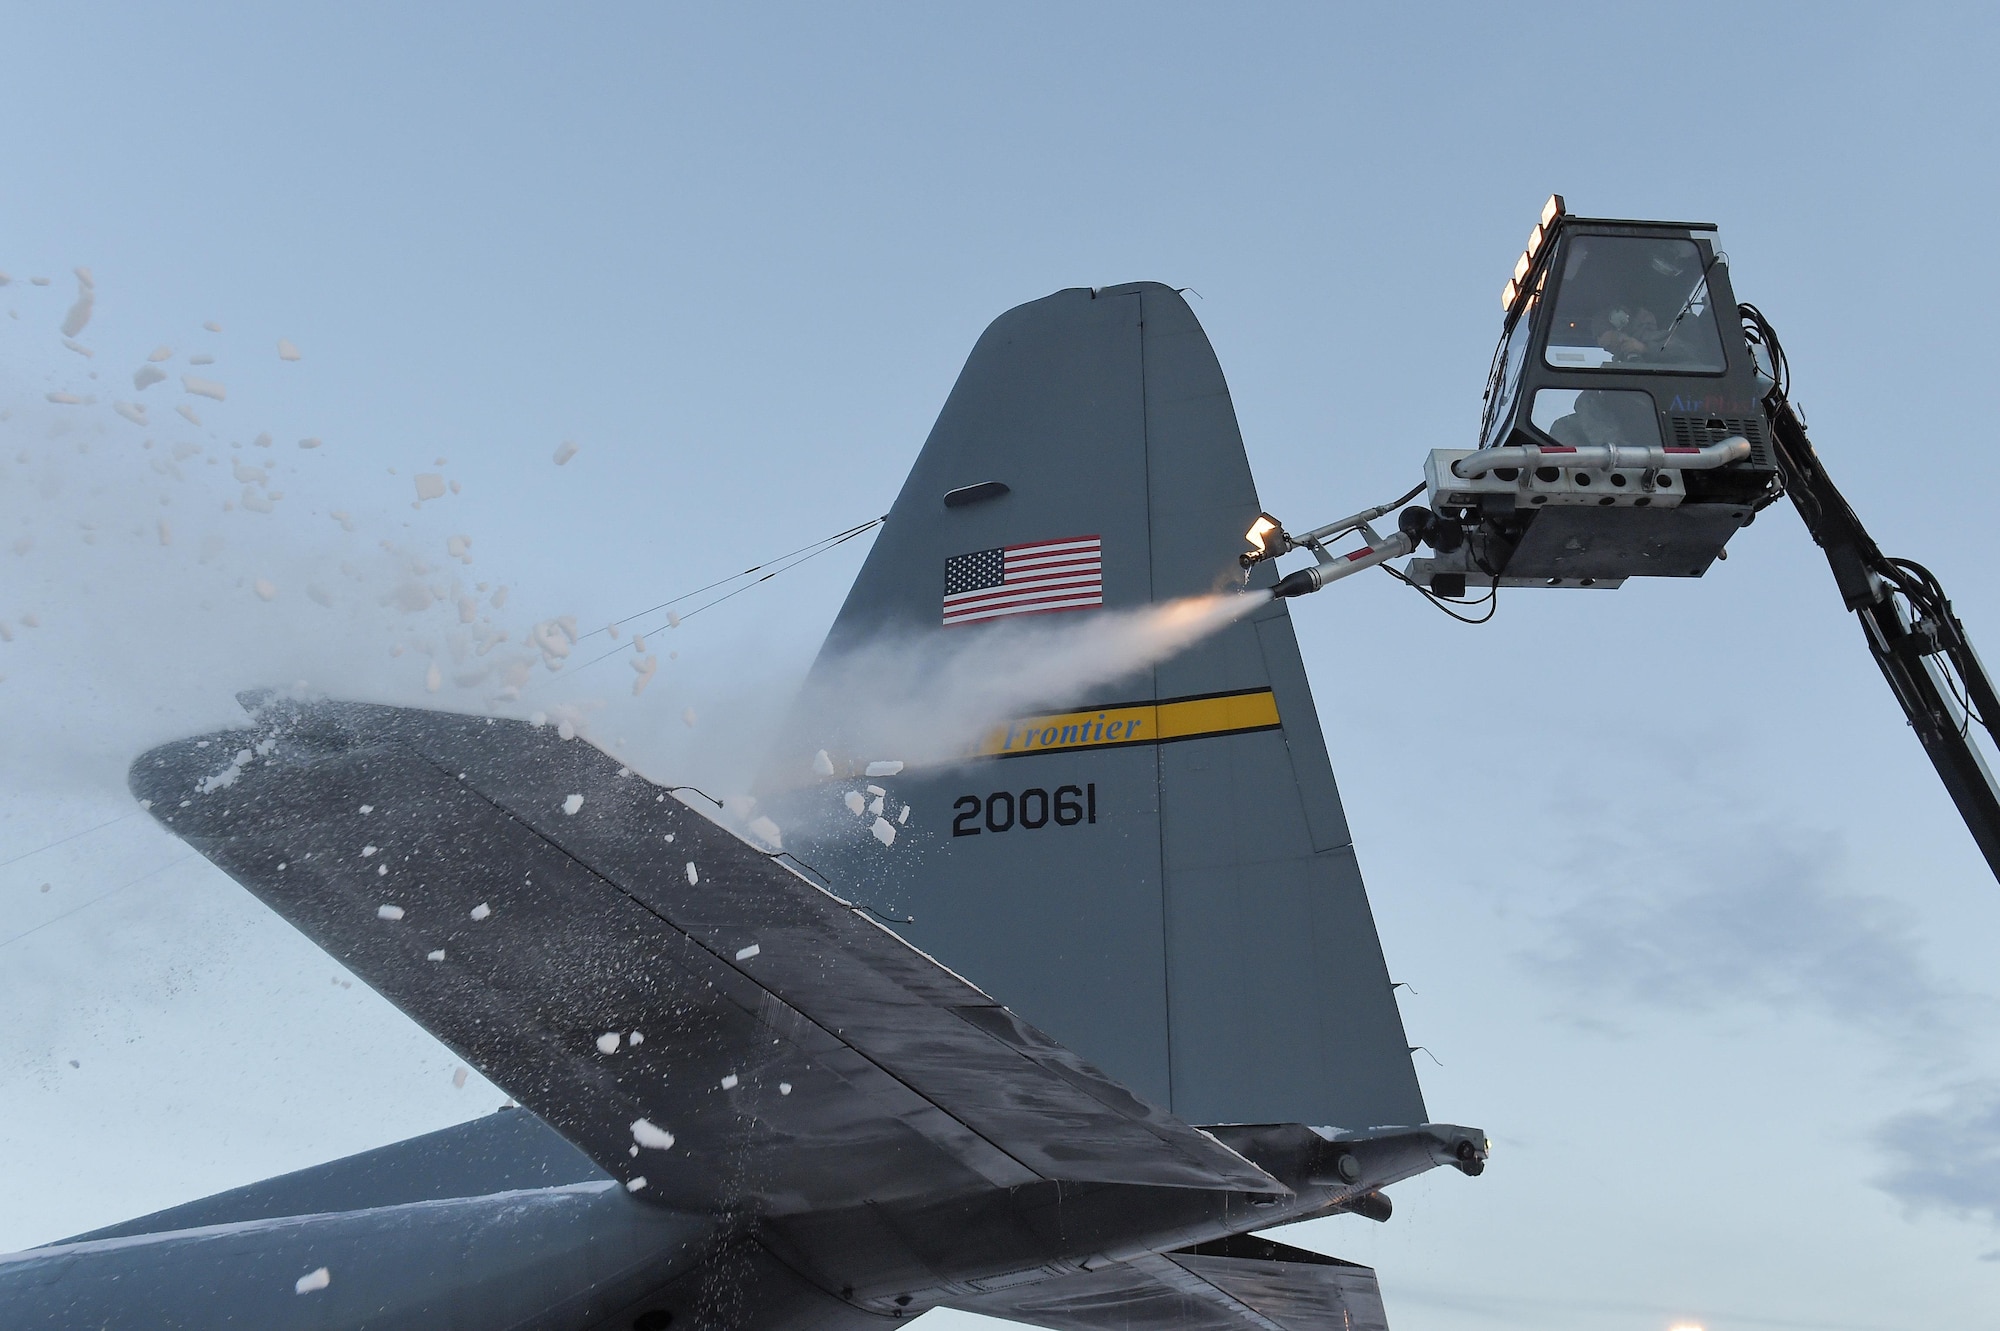 U.S. Air Force Airmen assigned to the 732nd Air Mobility Squadron deice an Alaska Air National Guard C-130H Hercules belonging to the 144th Airlift Squadron on Joint Base Elmendorf-Richardson, Alaska, Dec. 8, 2015. Deicing keeps aircraft operational despite the harsh Alaska winters by removing heavy layers of snow, ice and frost that could adversely affect flight. (U.S. Air Force photo/Alejandro Pena)